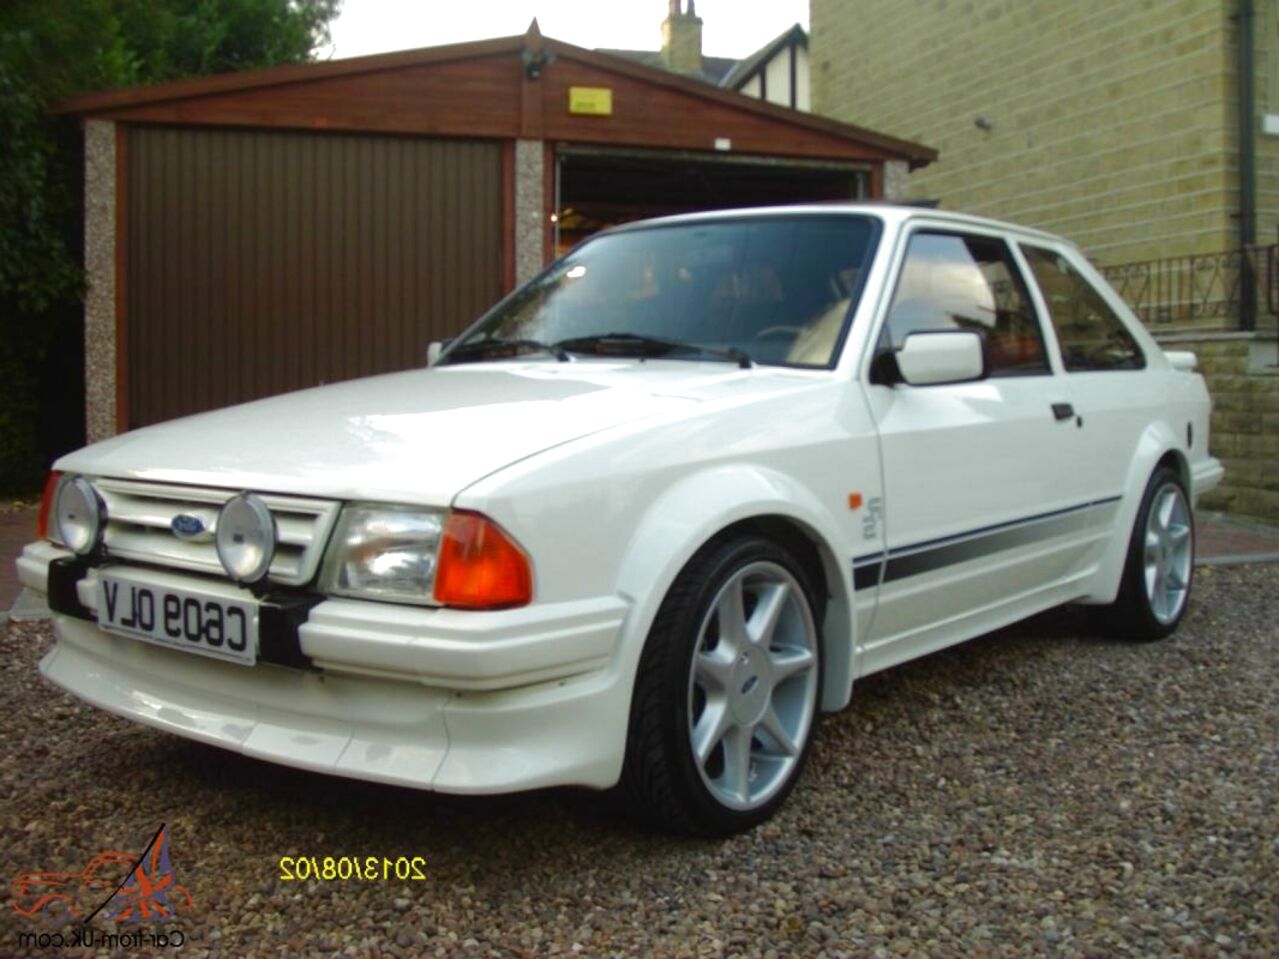 Ford Escort Rs Turbo Series 1 For Sale In Uk